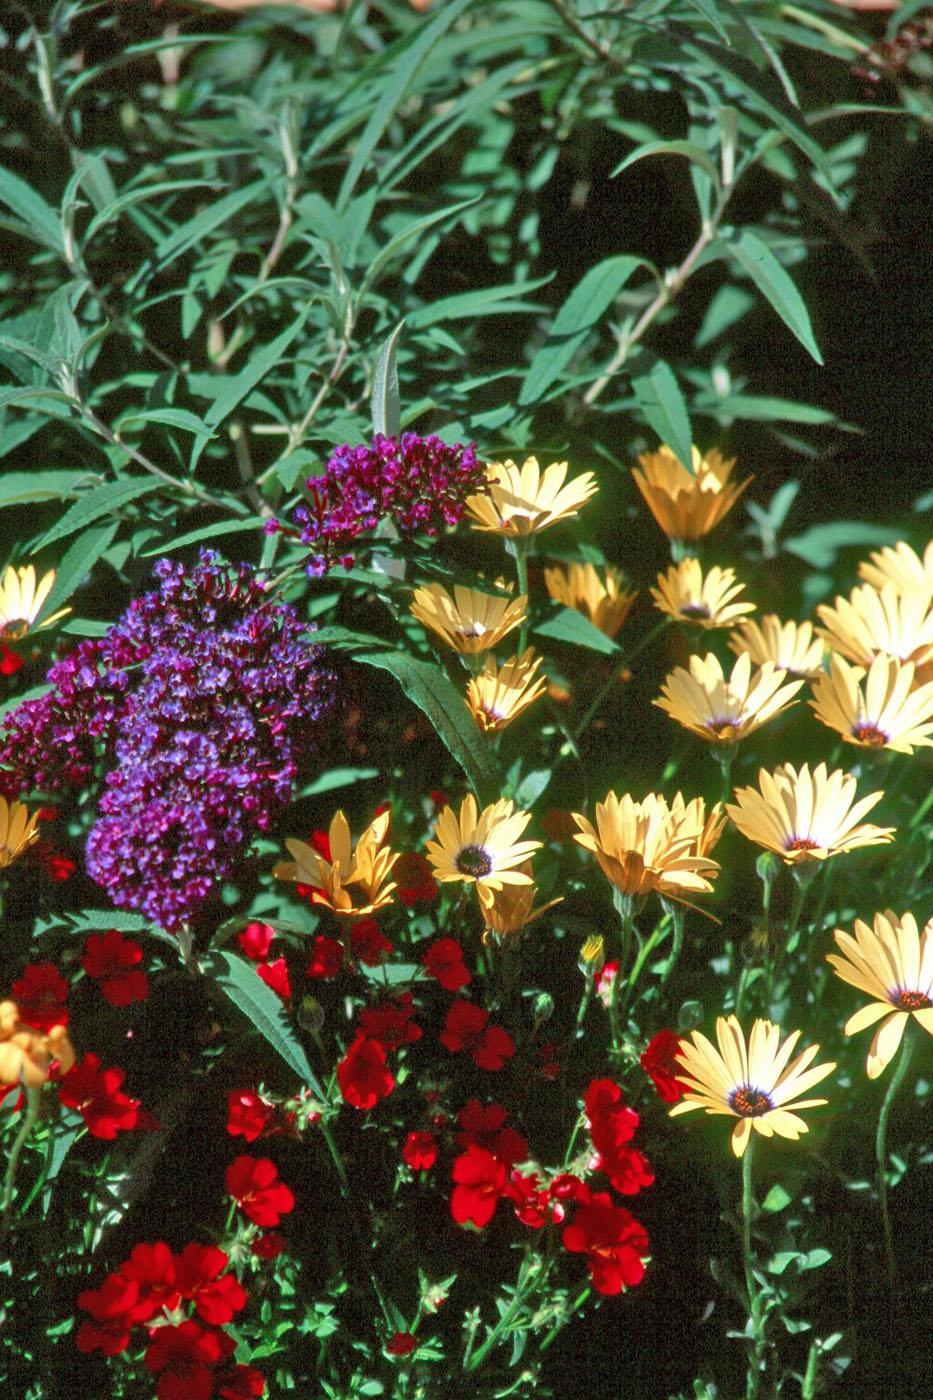 Emperor Blue buddleia works in beautiful harmony with these Sunsatia Cranberry nemesia and Lemon Symphony osteospermum. Try lantana and petunias as combinations for this time of the year.